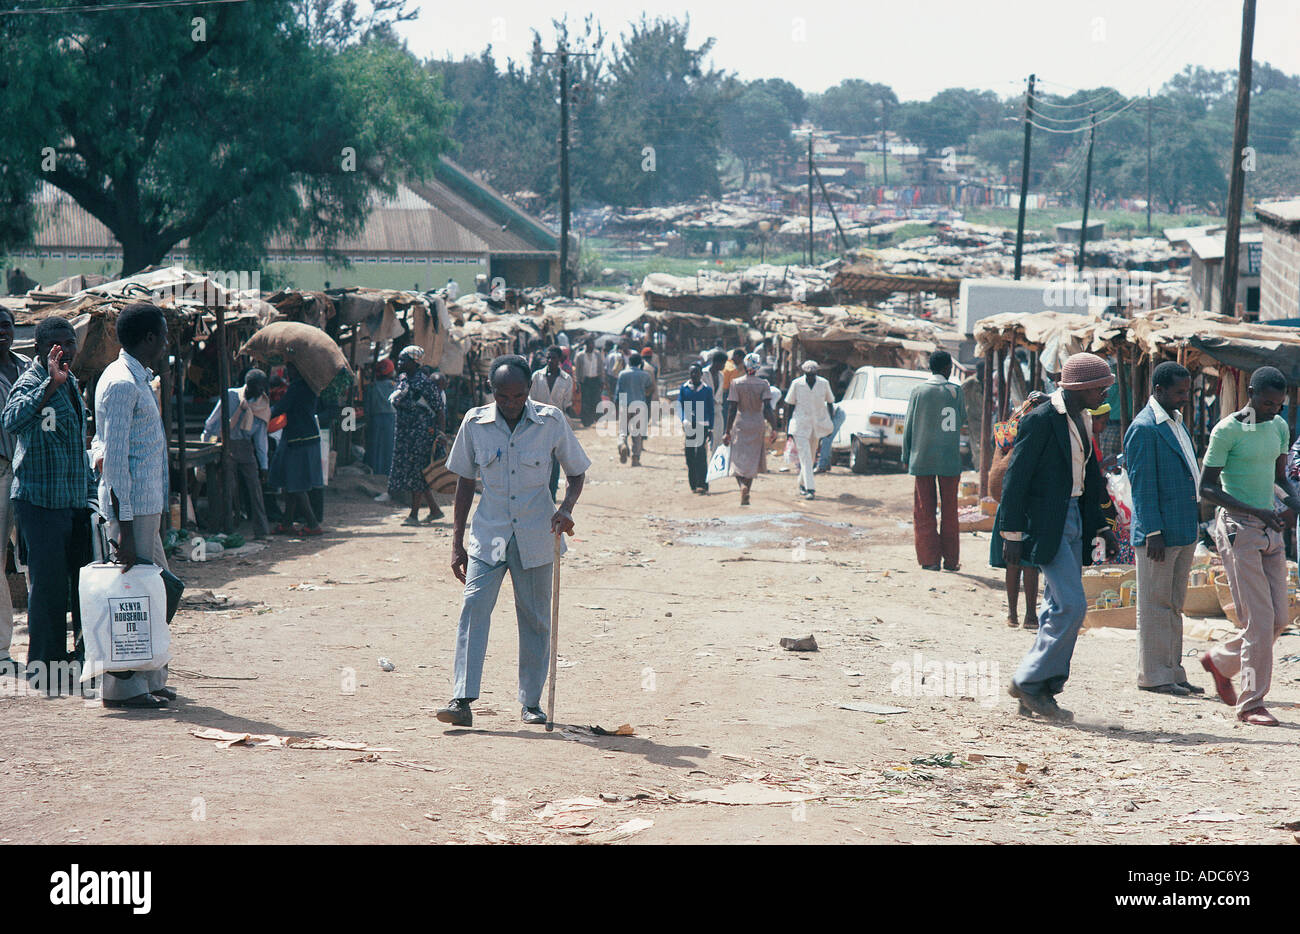 People and vehicles on a busy unmade street in a slum area of Nairobi Kenya East Africa Stock Photo